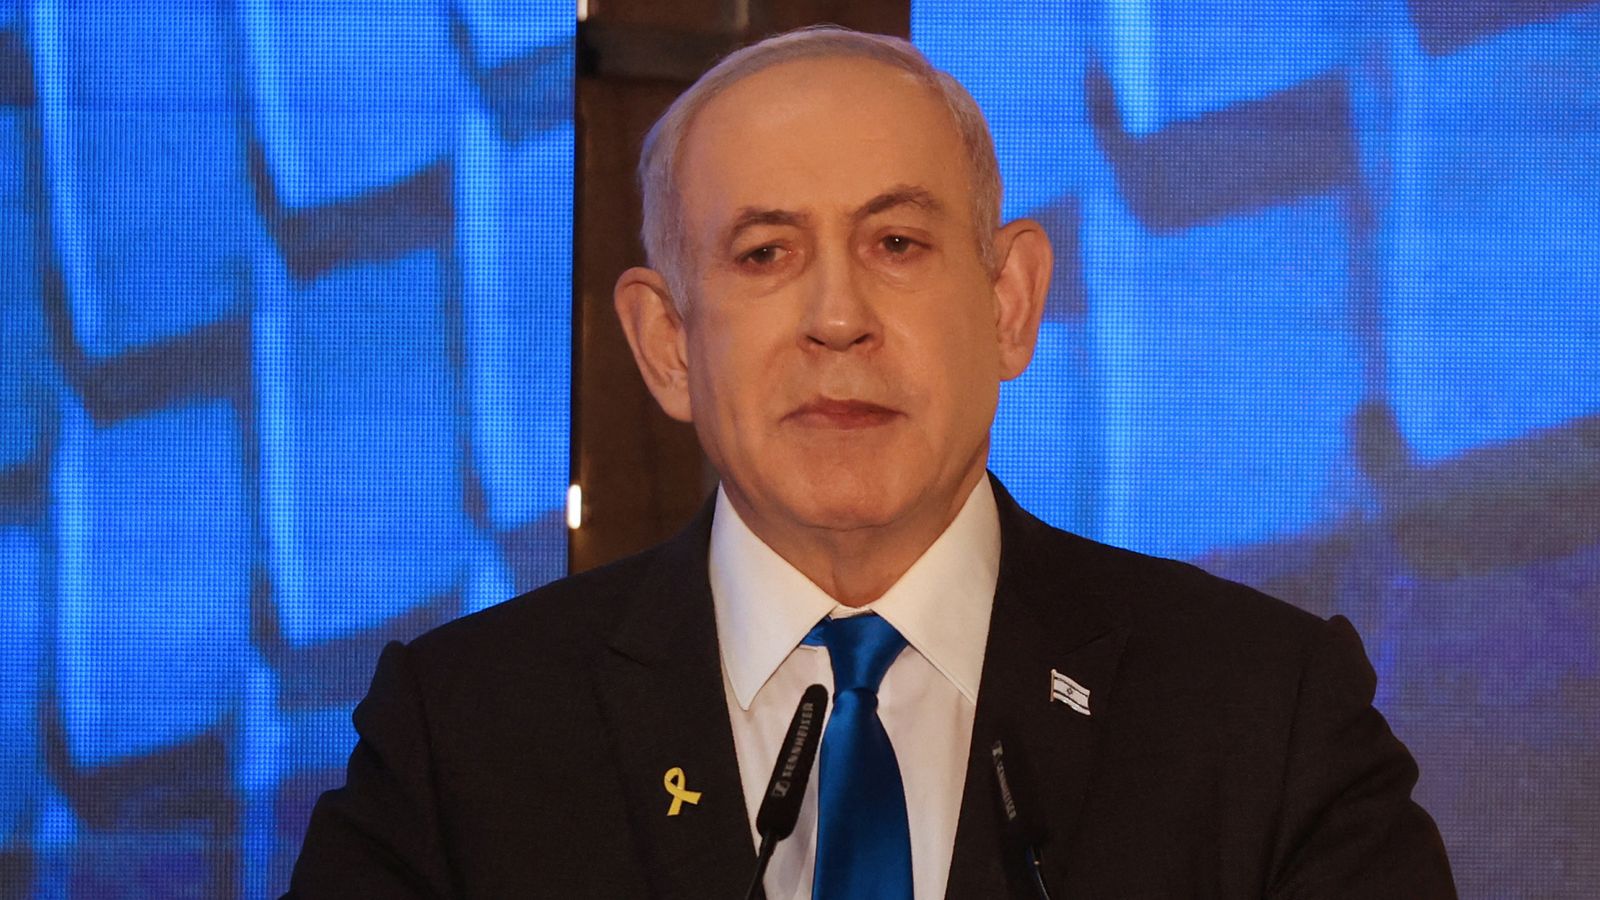 Benjamin Netanyahu stands strong as Israel's prime minister for now - despite cabinet threats